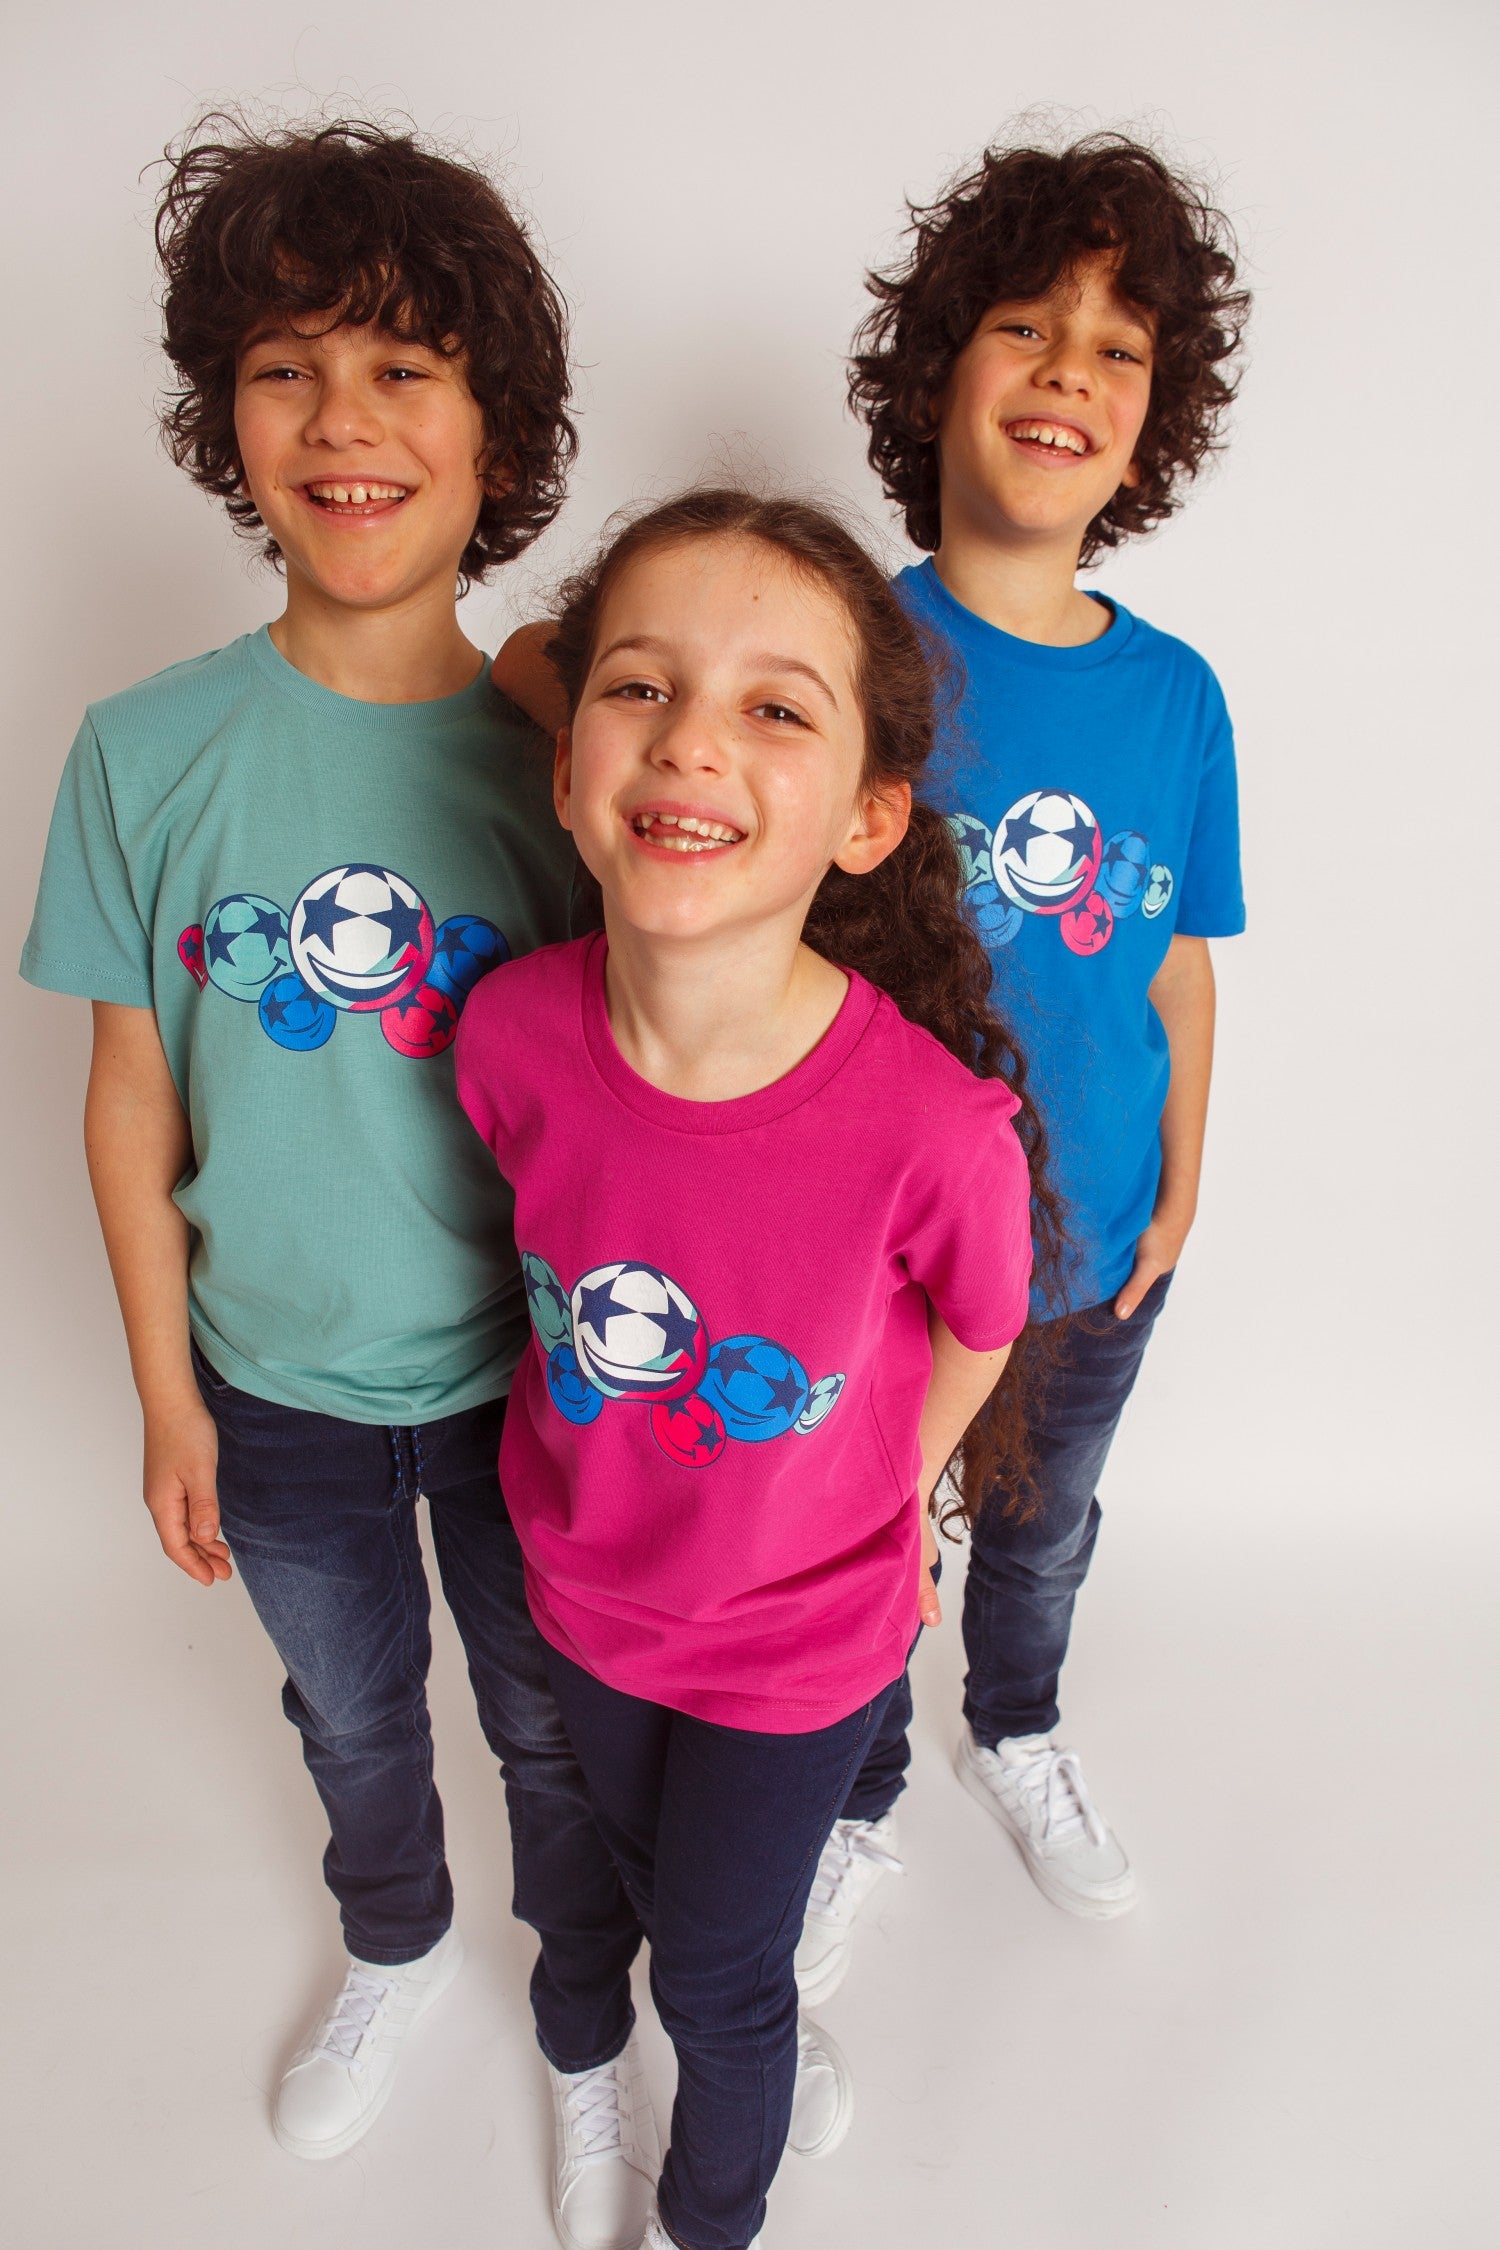 UCL Smiling Starball Kids T-Shirt - Royal Blue UEFA Club Competitions Online Store